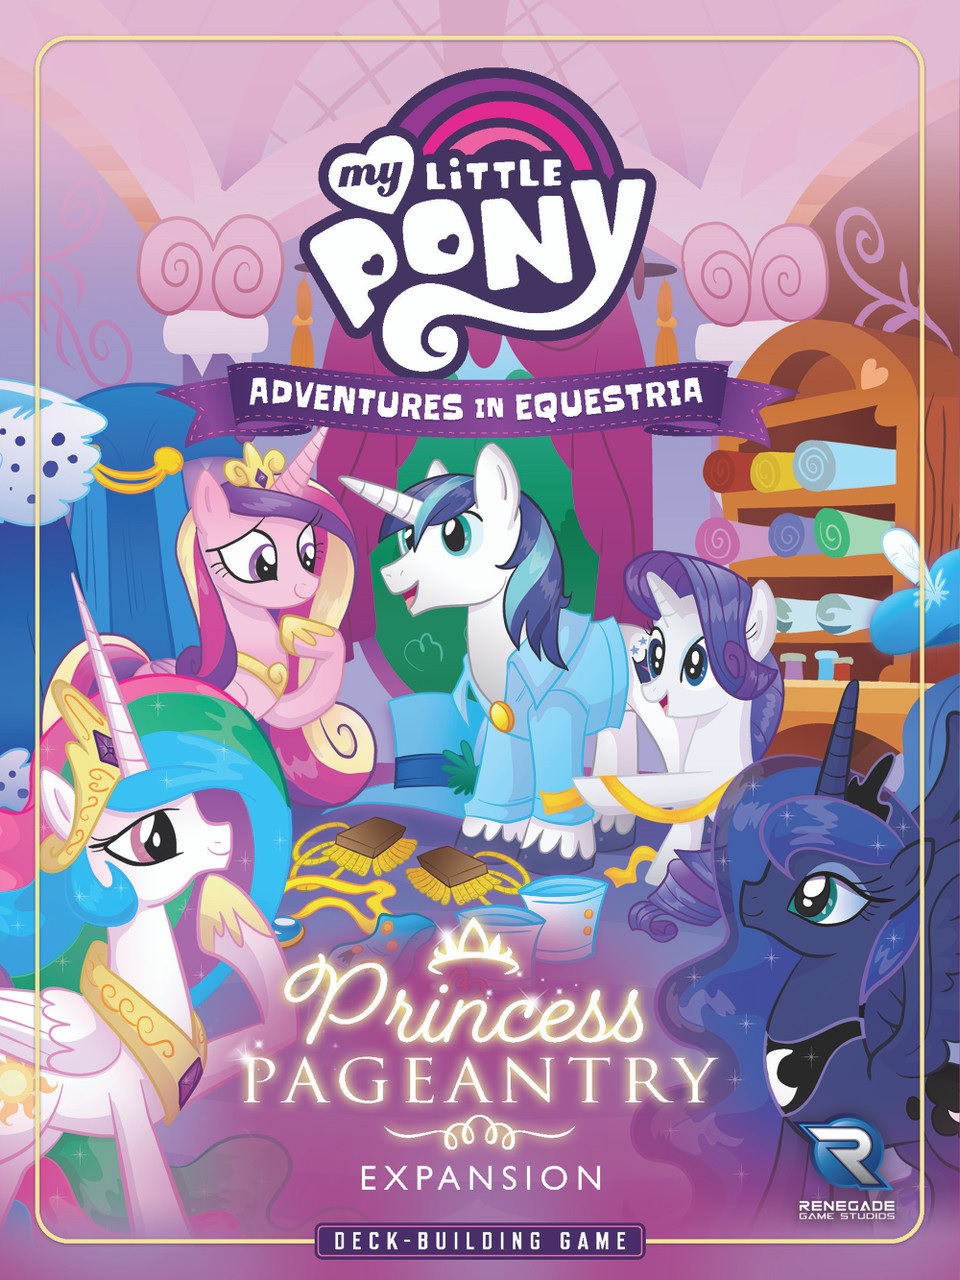 My Little Pony: Adventures in Equestria Deck-Building Game: Princess Pageantry Expansion 